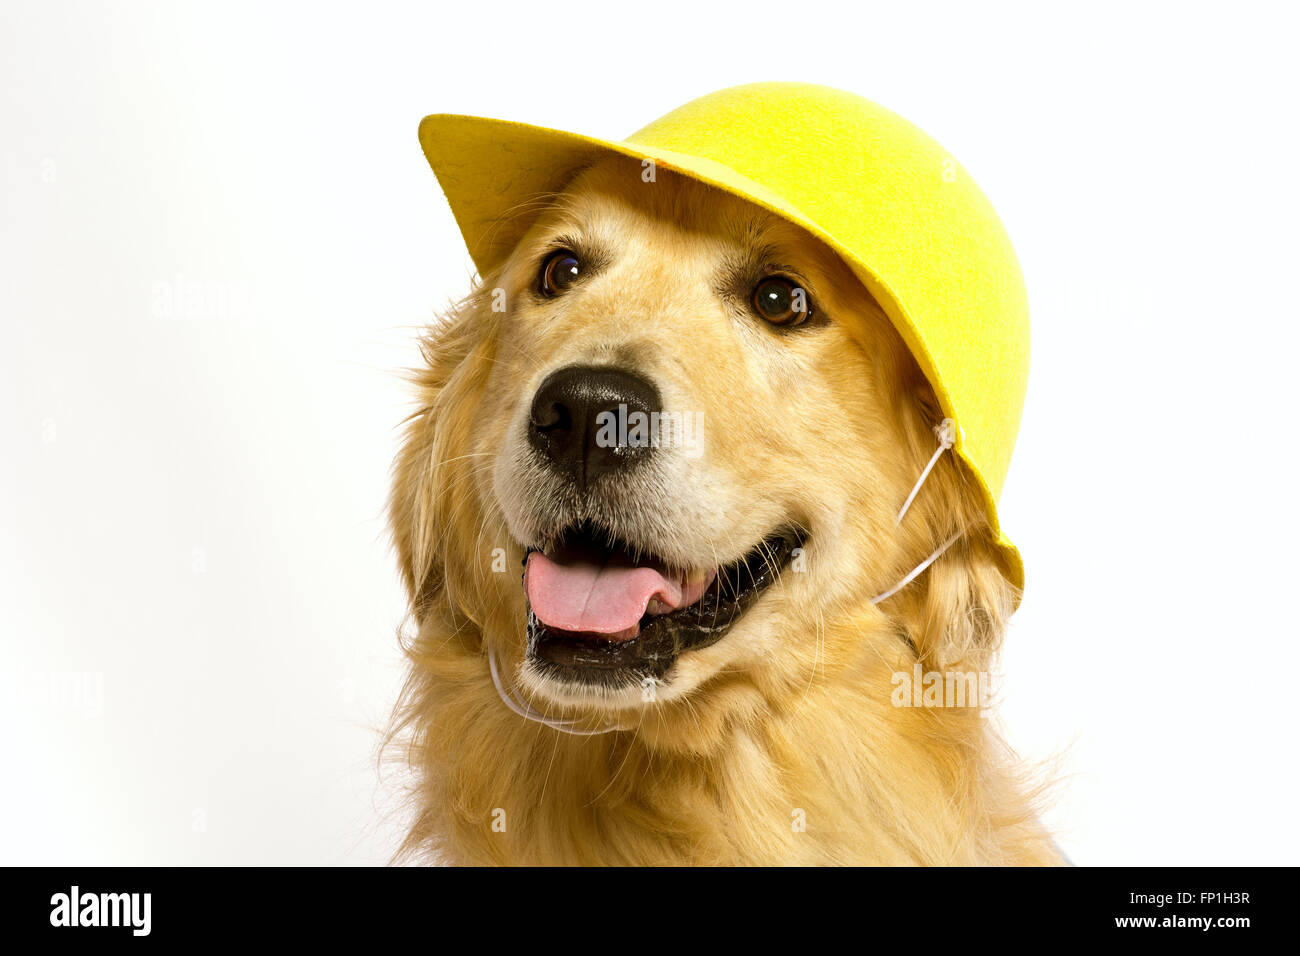 construction worker dog Stock Photo